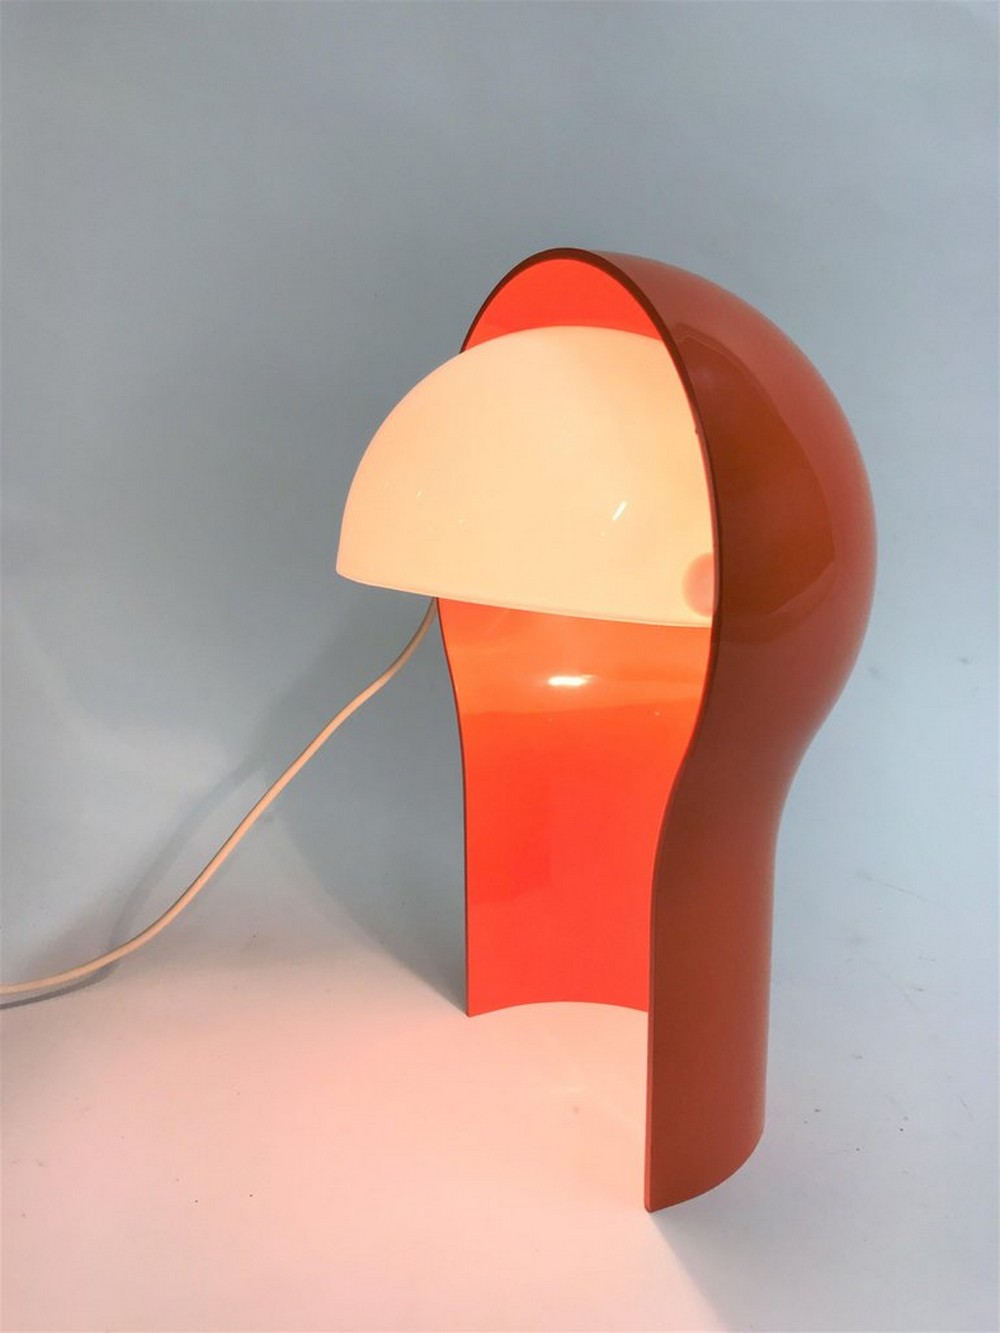 7 Bespoke Table Lamp Designs That Are At The 1stdibs Online Store